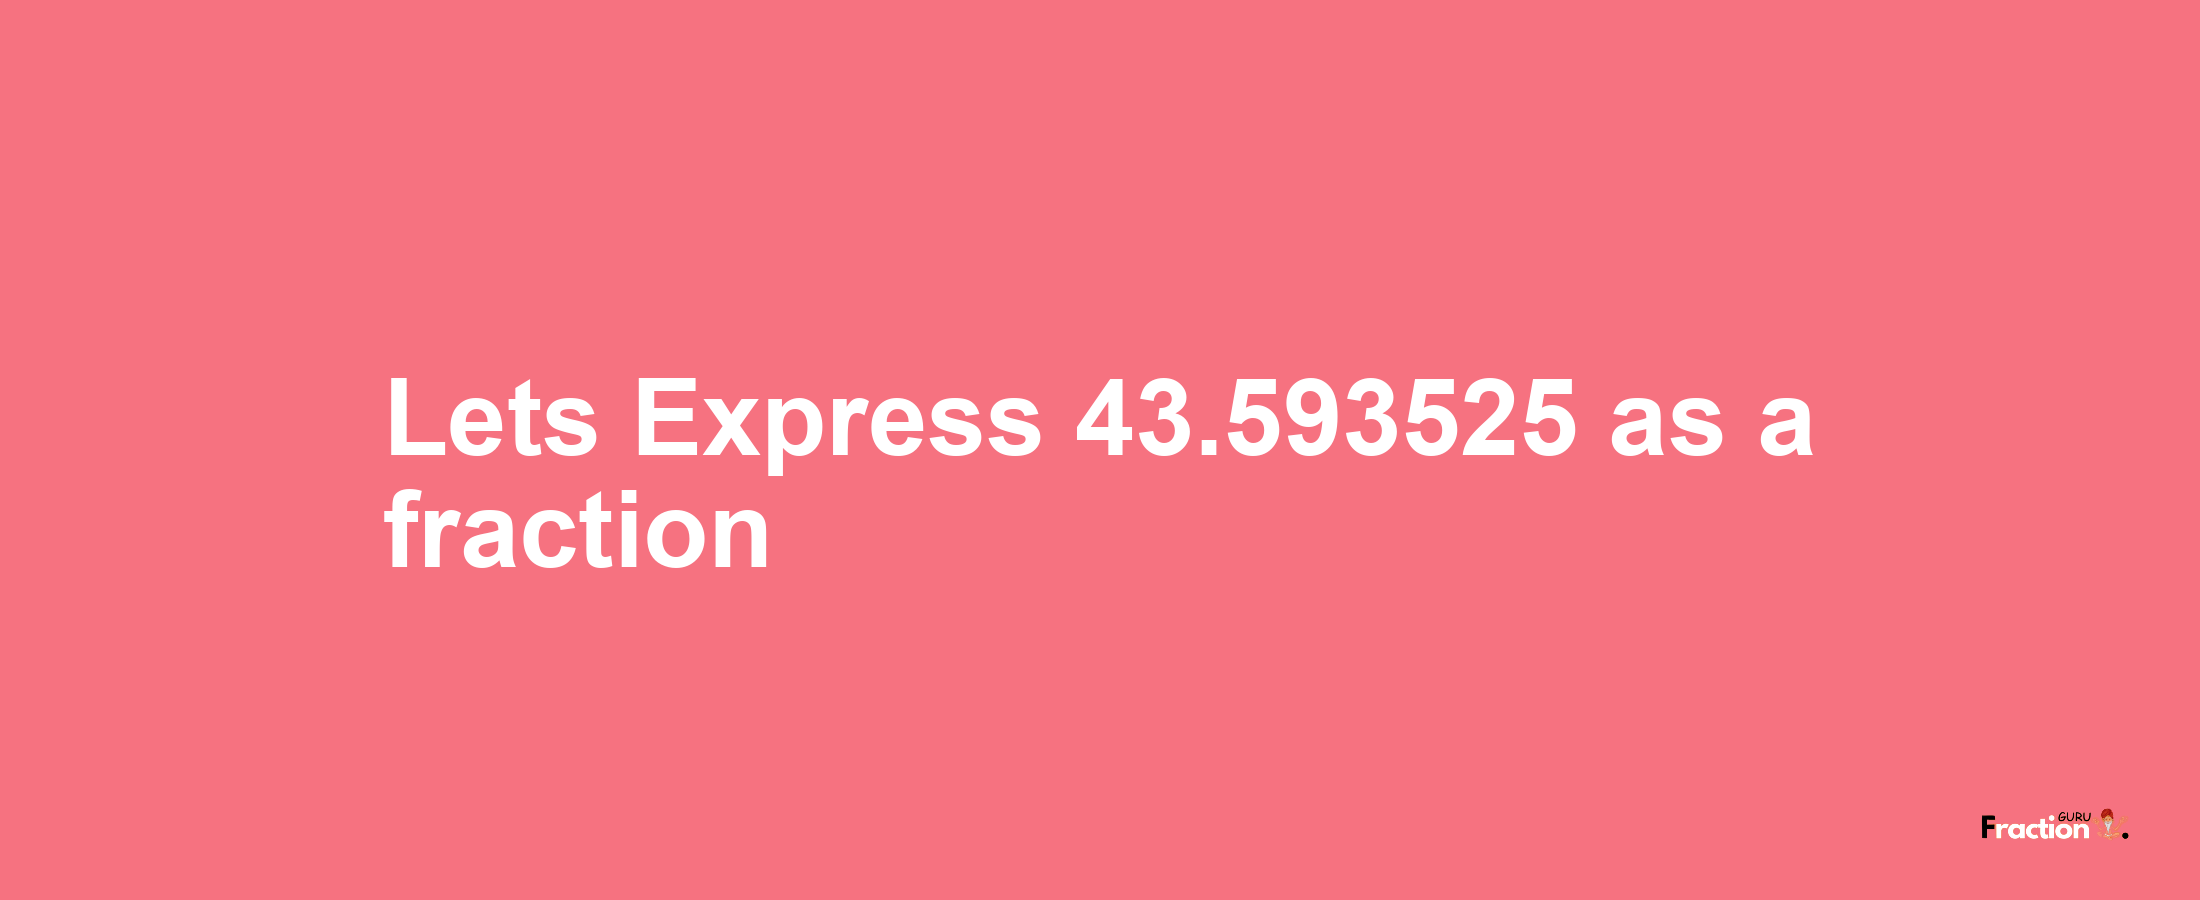 Lets Express 43.593525 as afraction